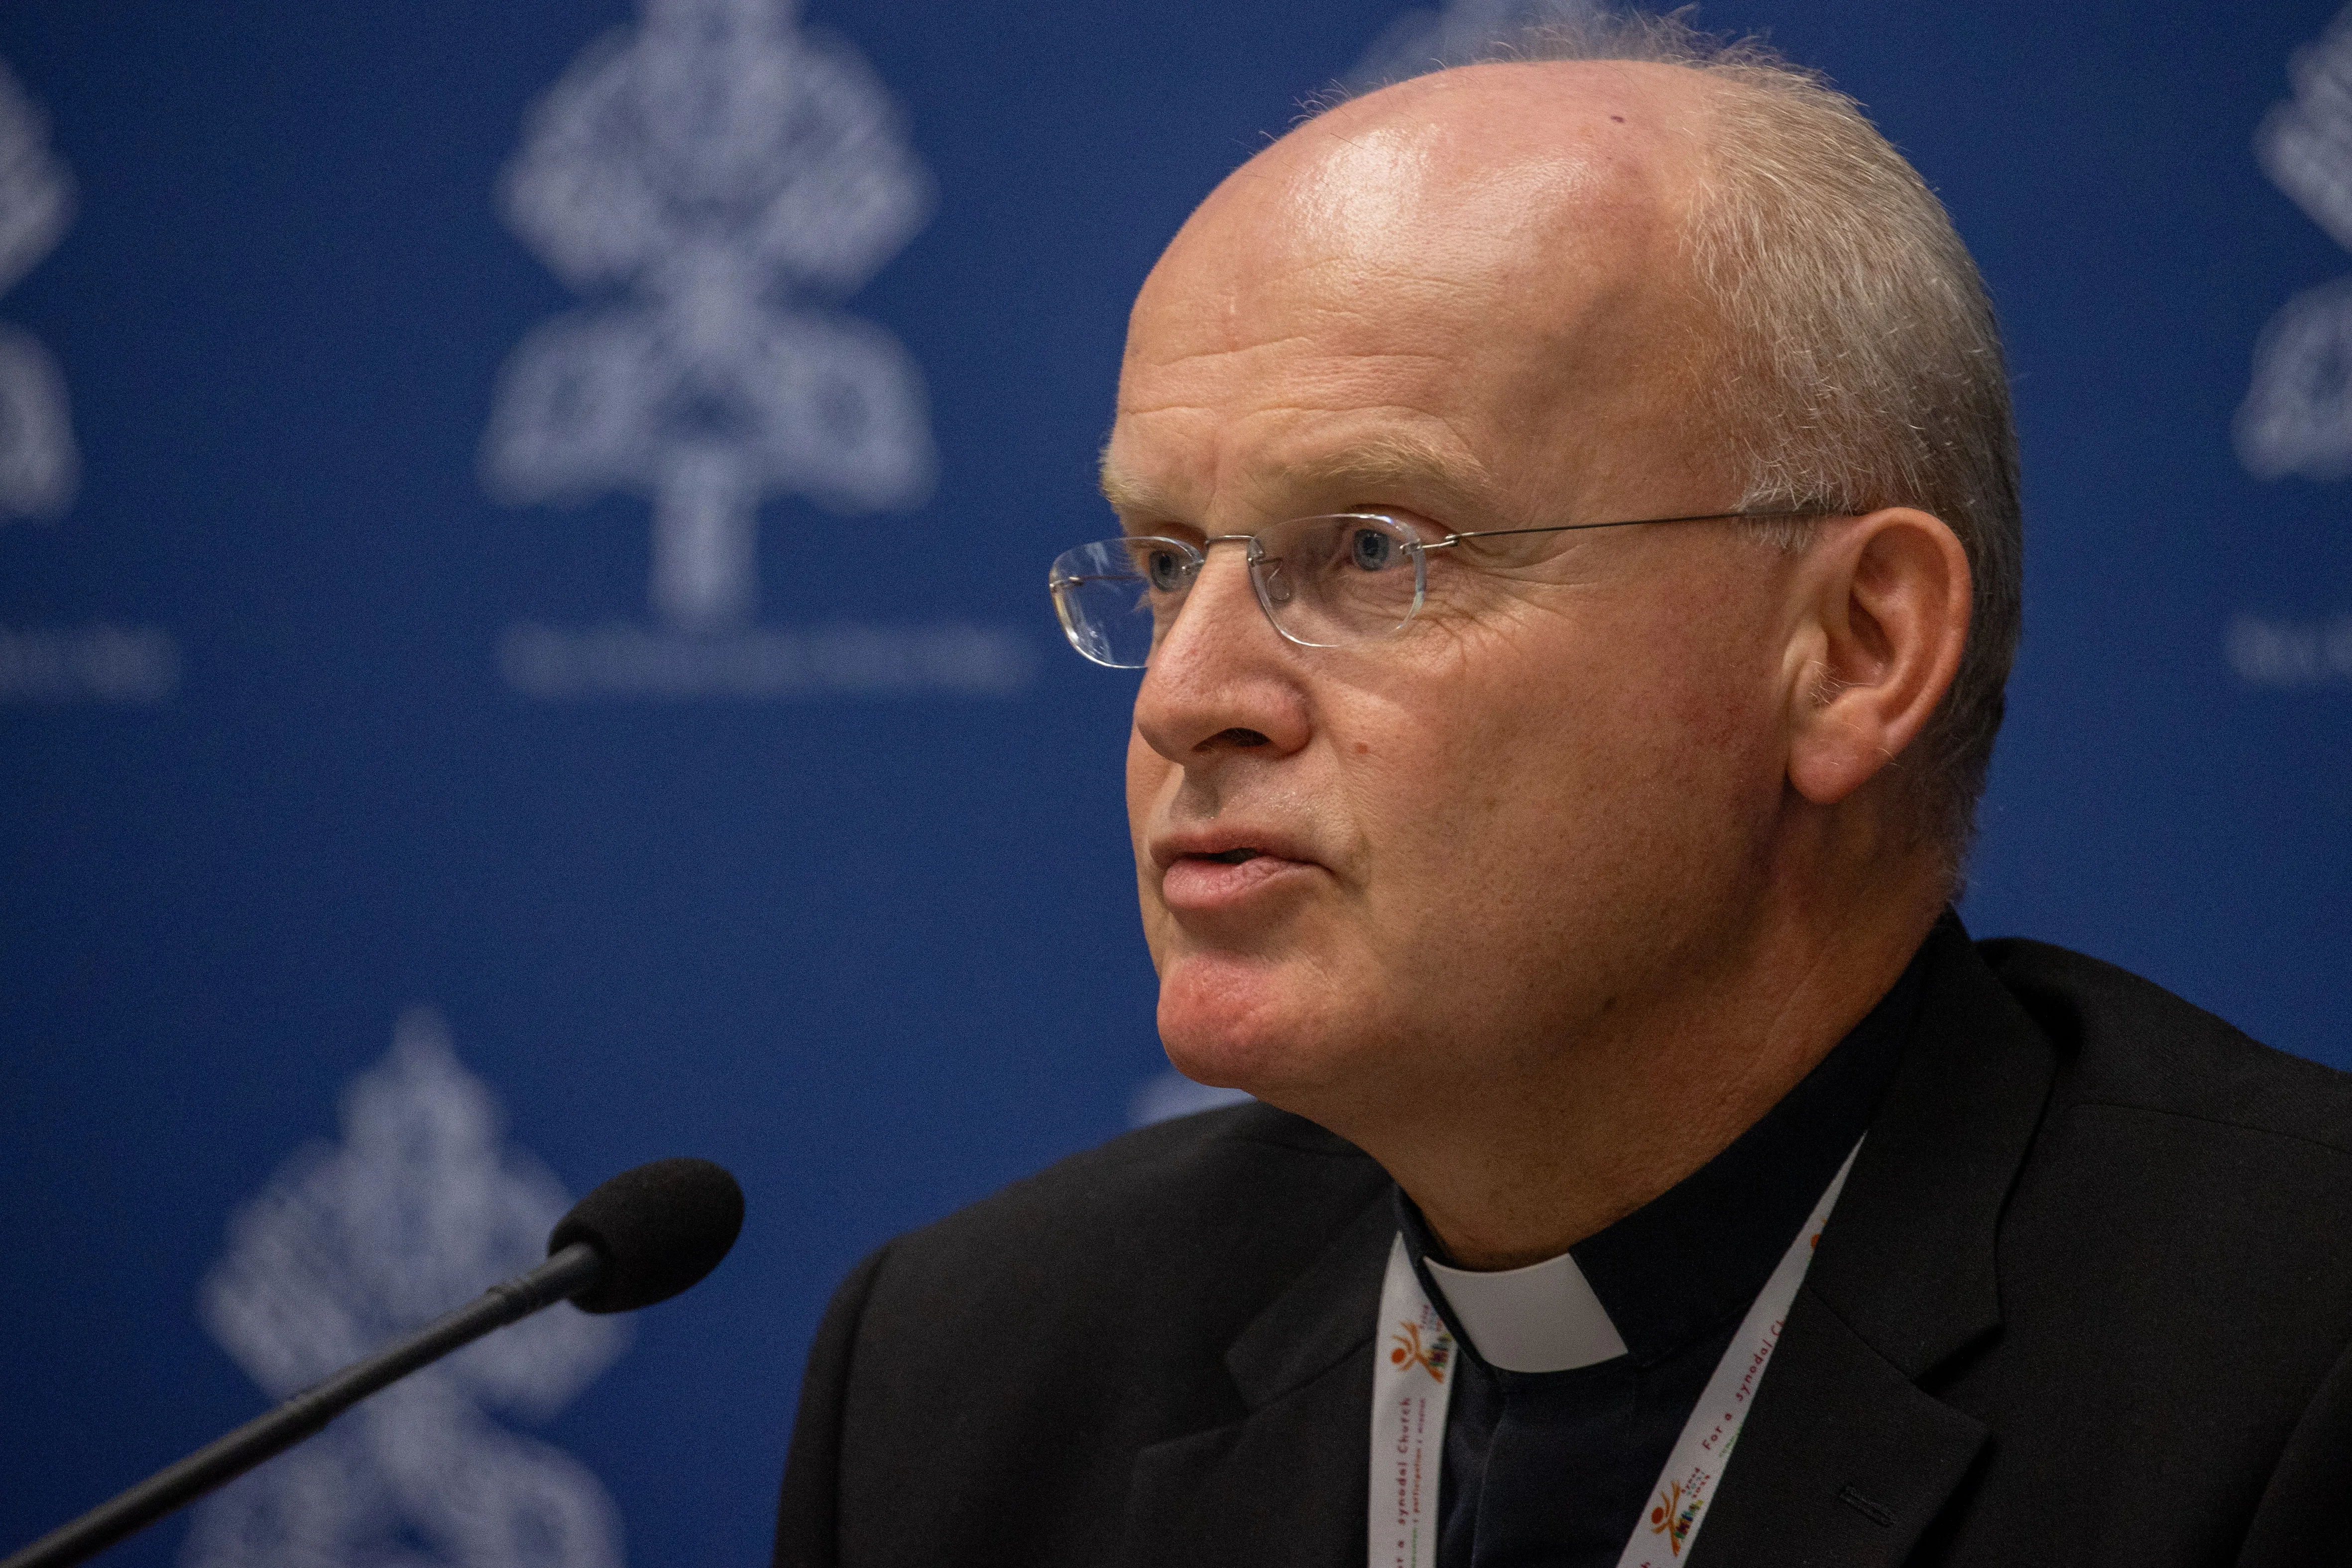 Bishop Franz-Josef Overbeck of Essen, Germany at the Synod on Synodality press briefing Oct. 21, 2023.?w=200&h=150